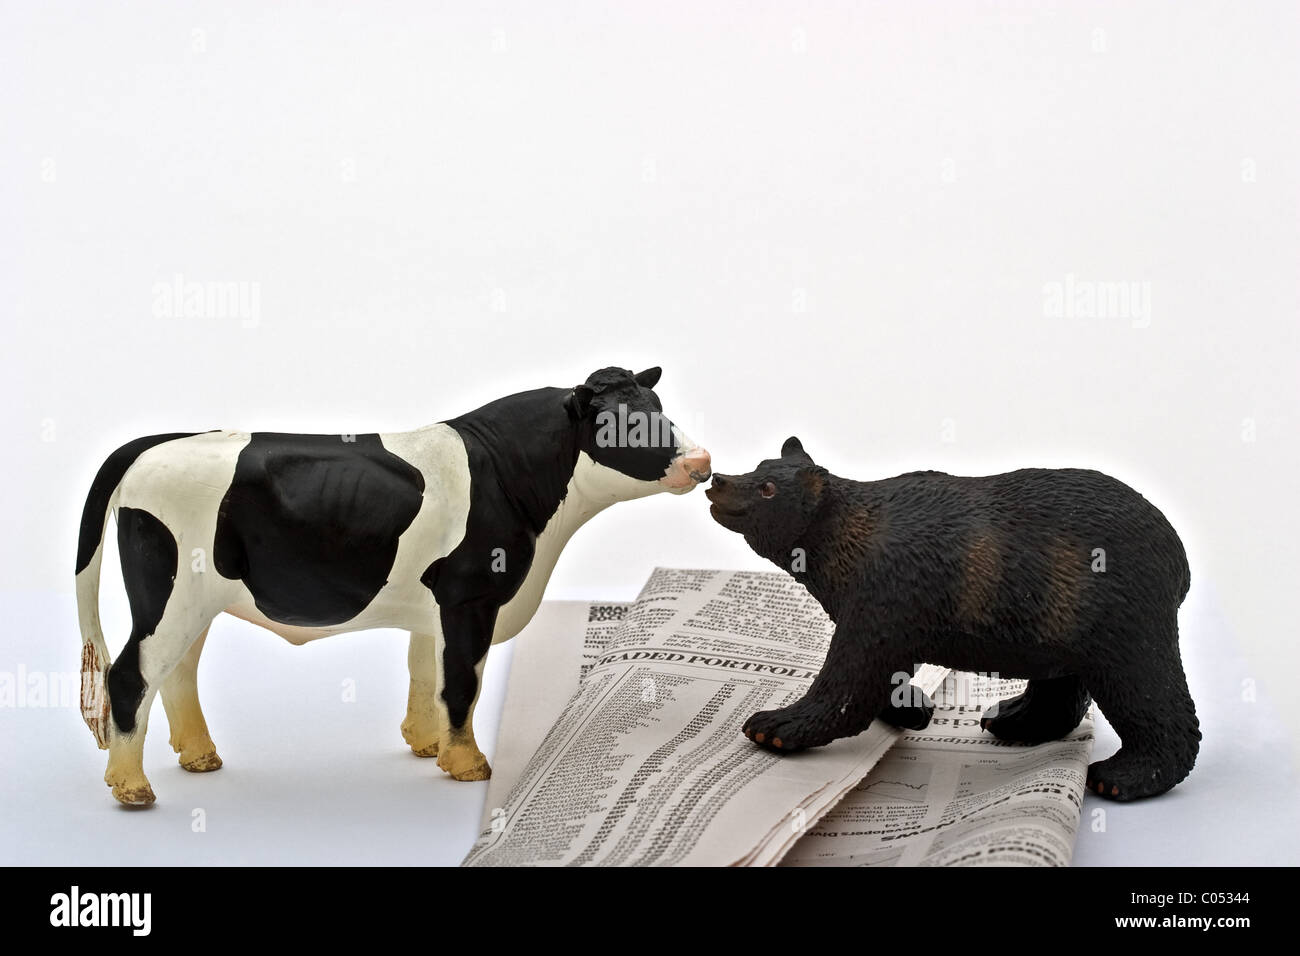 Bear standing face to face with a bullupon a stock market listing. Stock Photo